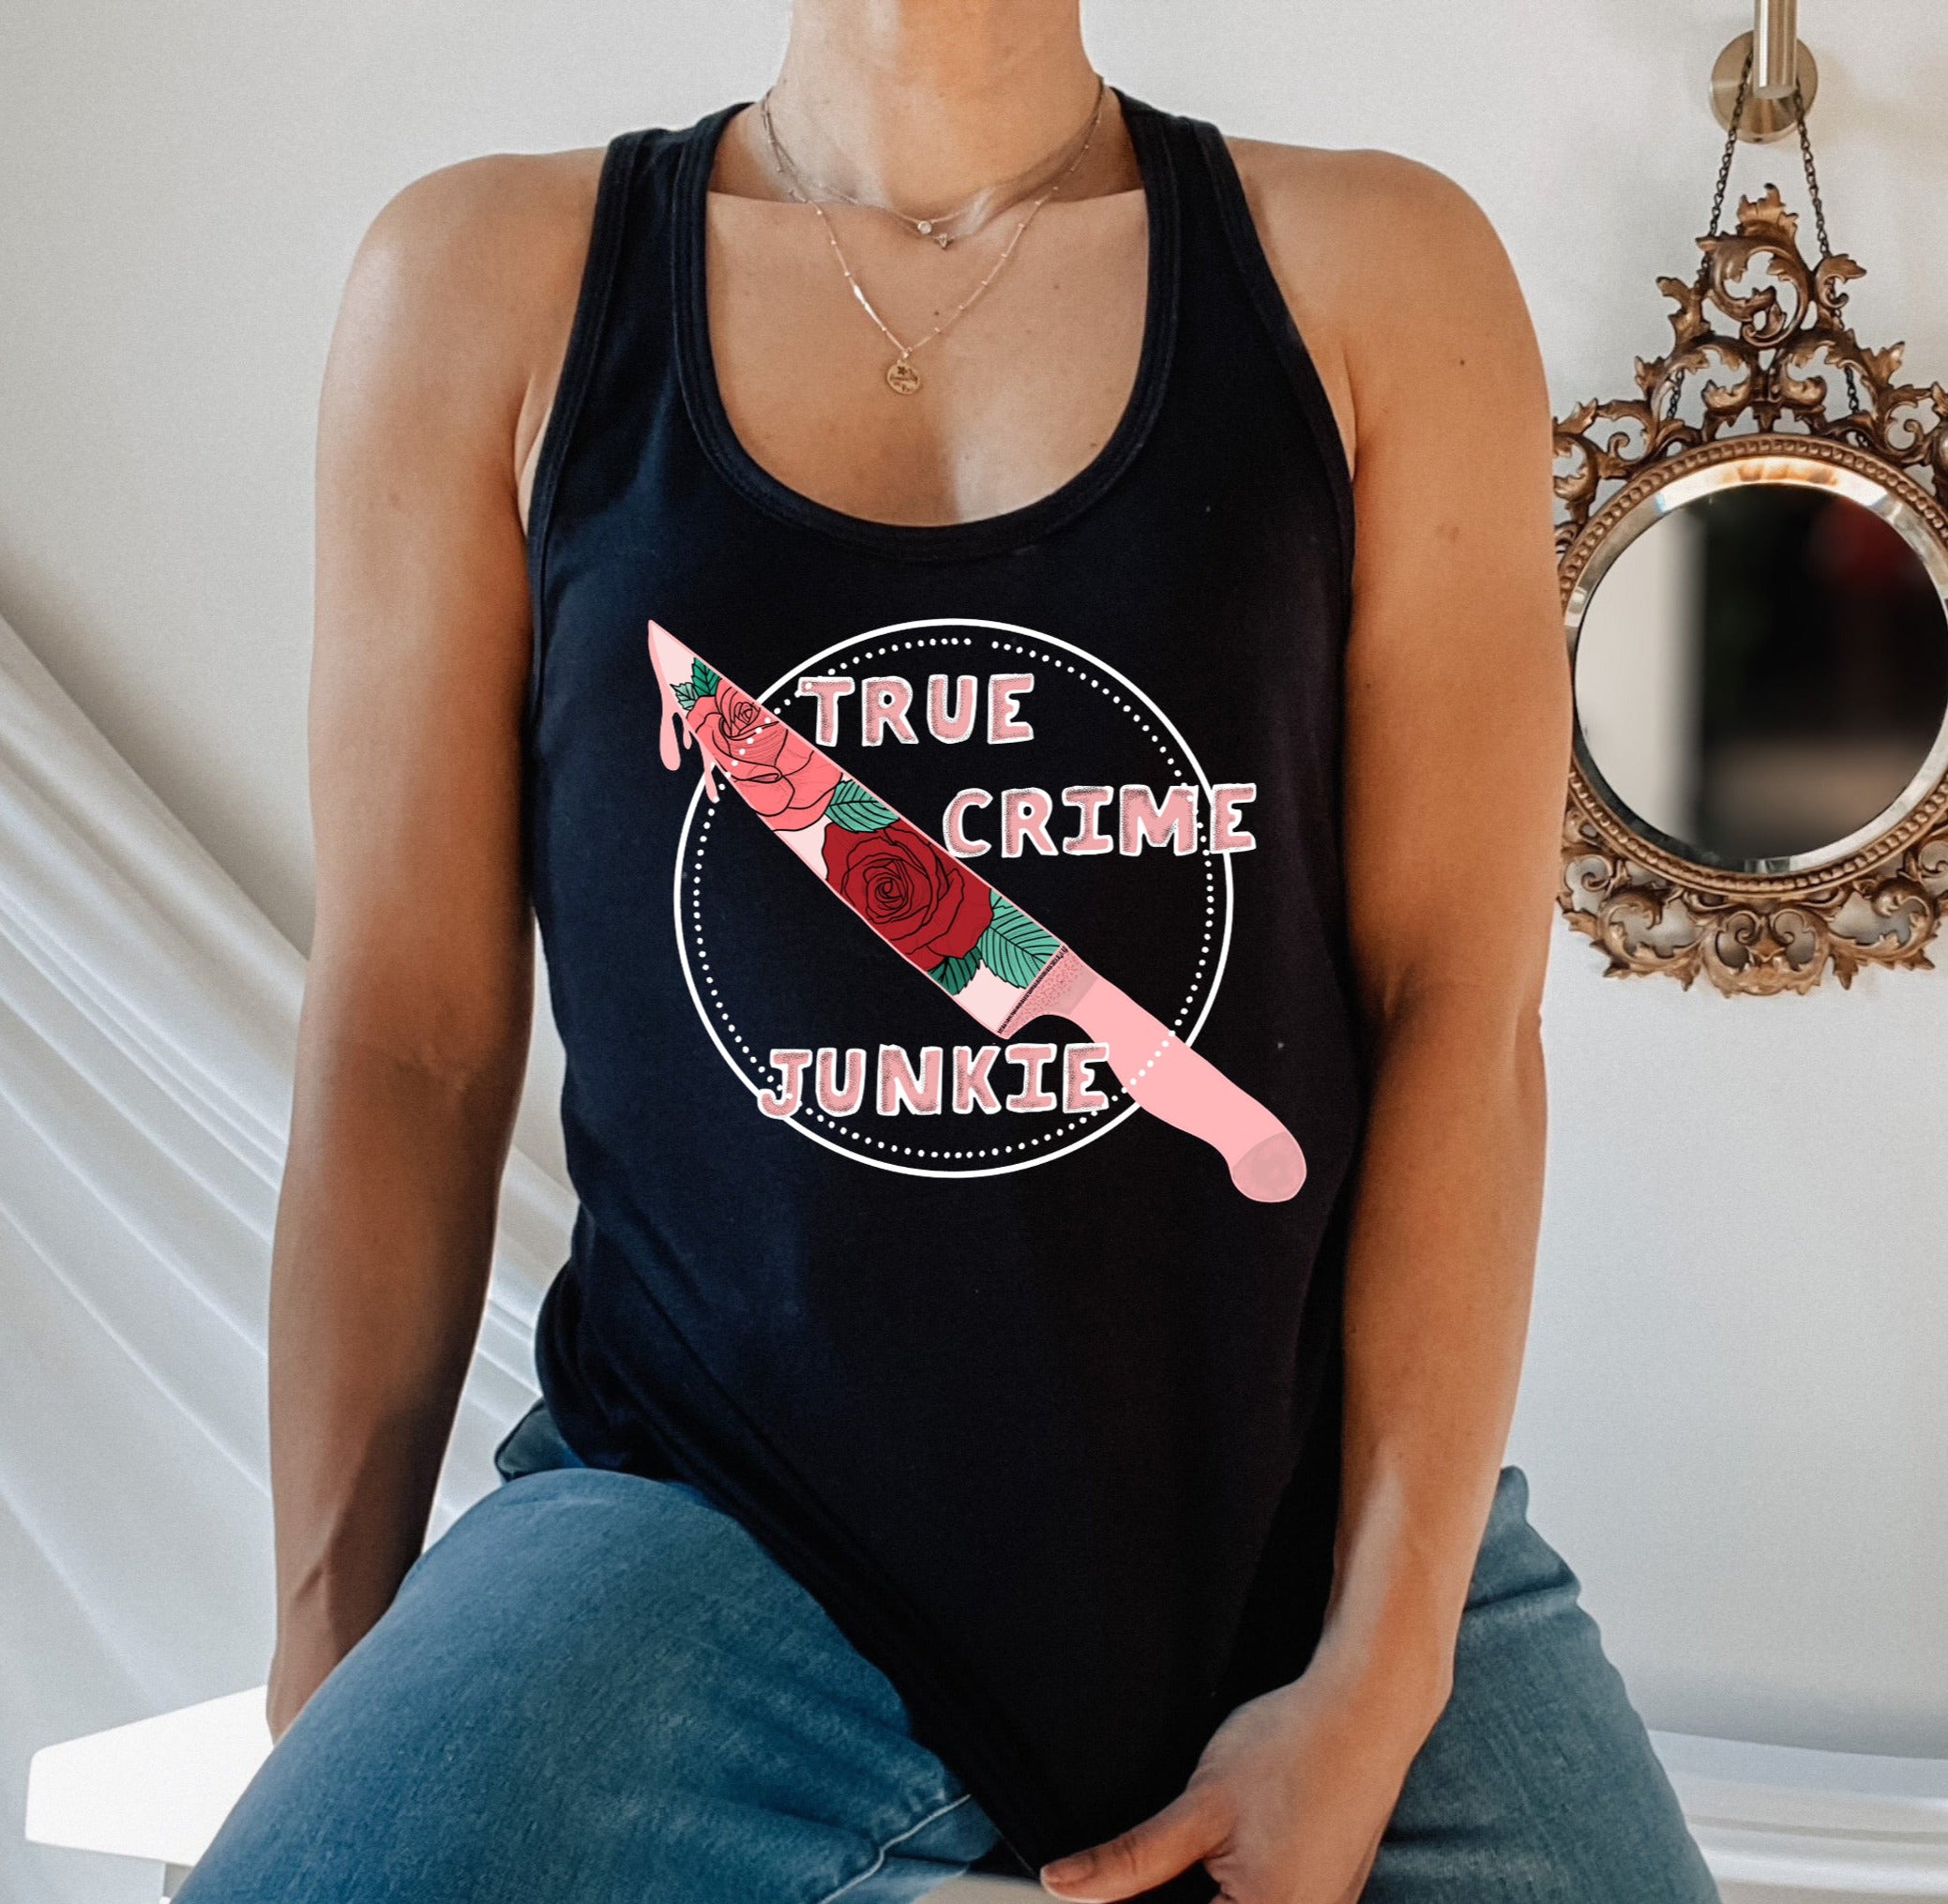 black tank top with a knife that says true crime junkie - HighCiti